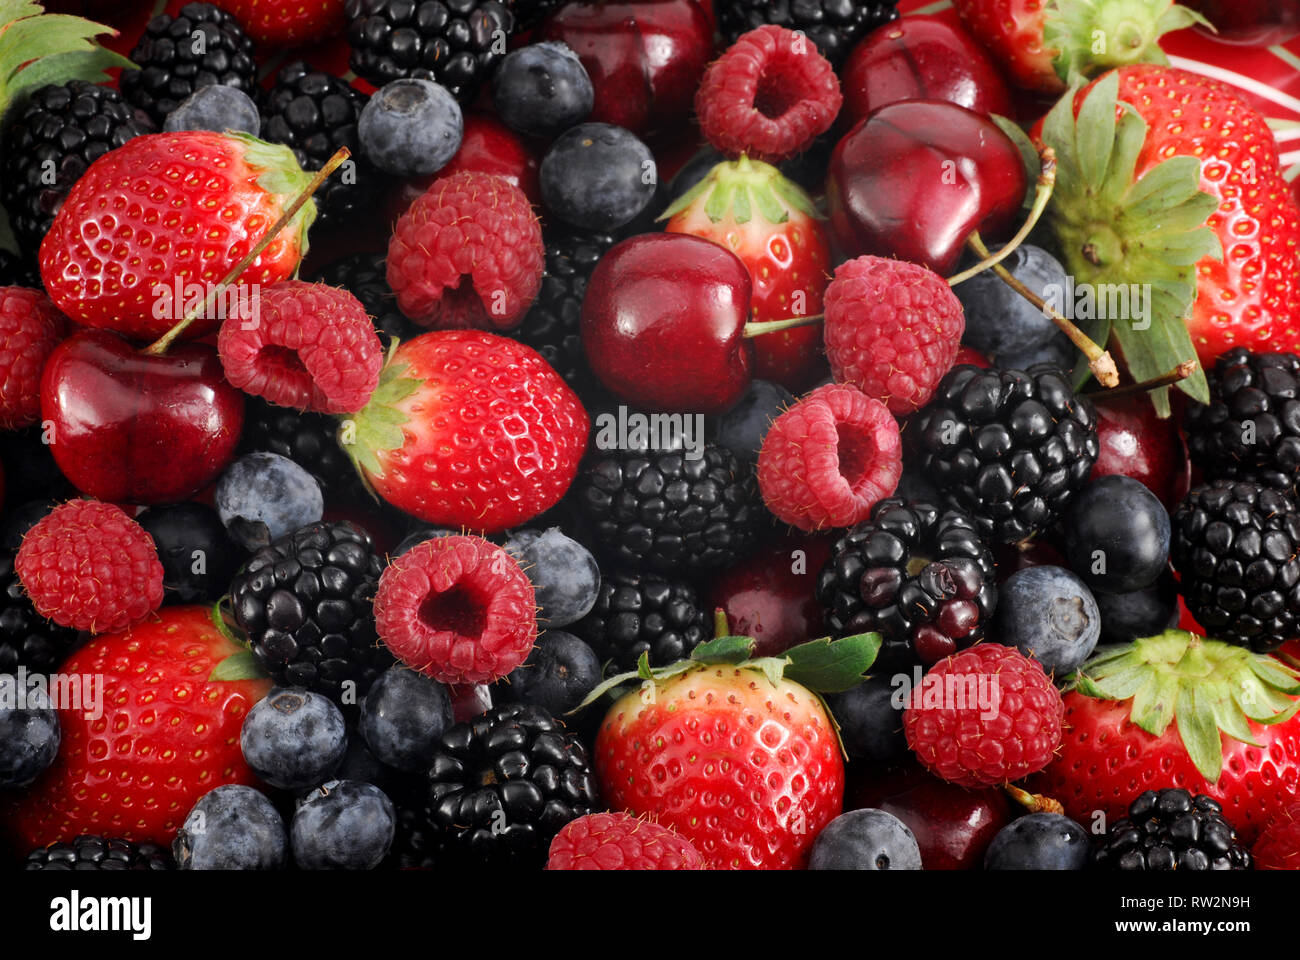 Close-up image of berries, background image Stock Photo